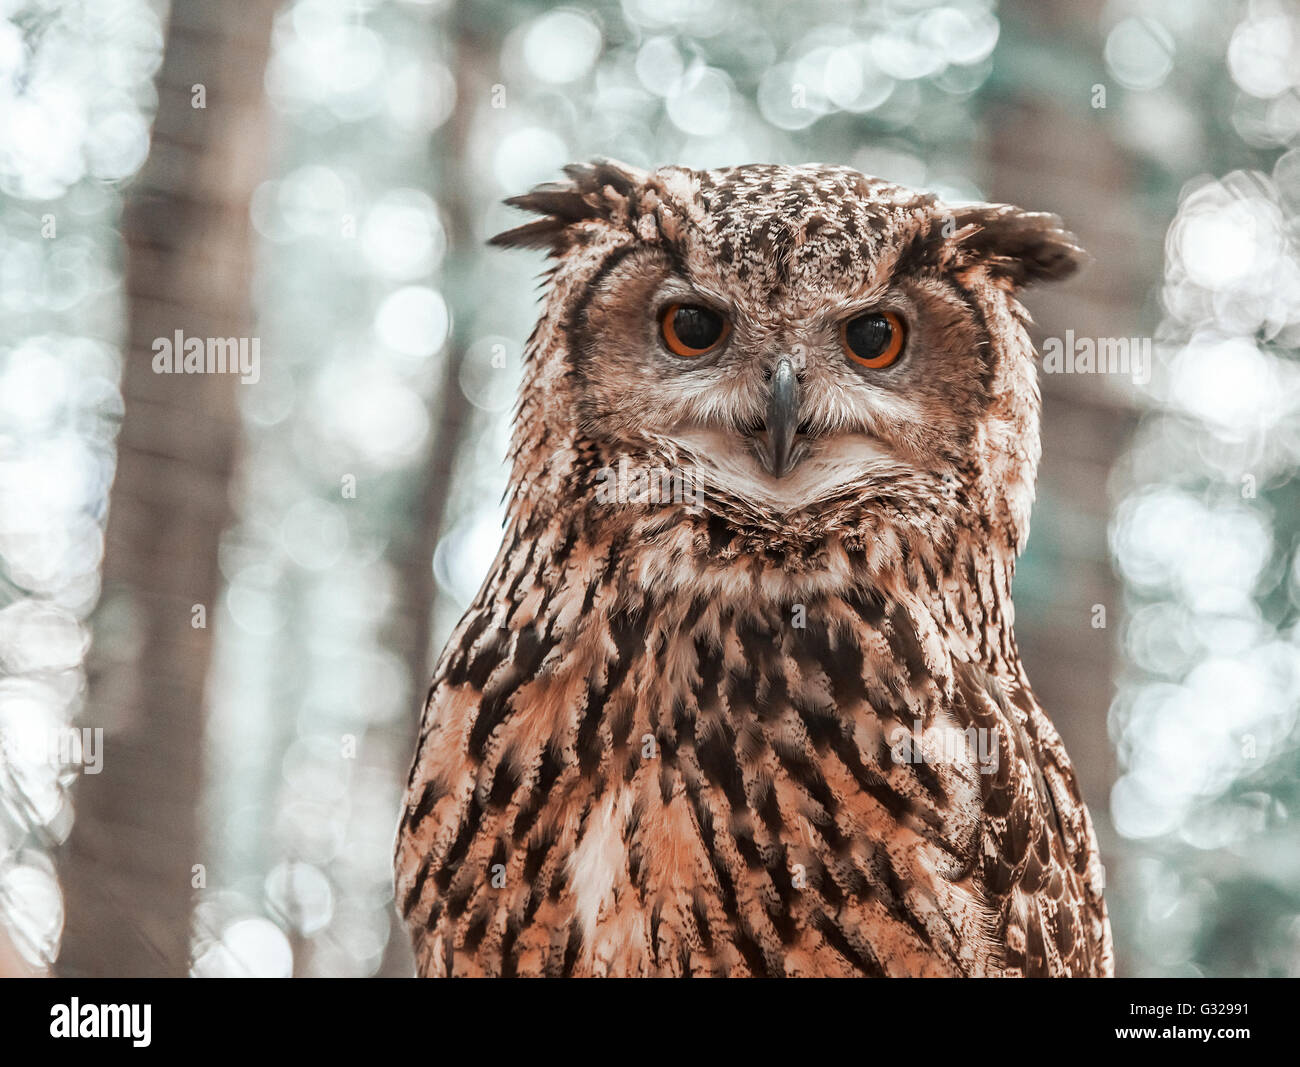 Owl looking directly at the camera on the background of trees. Stock Photo